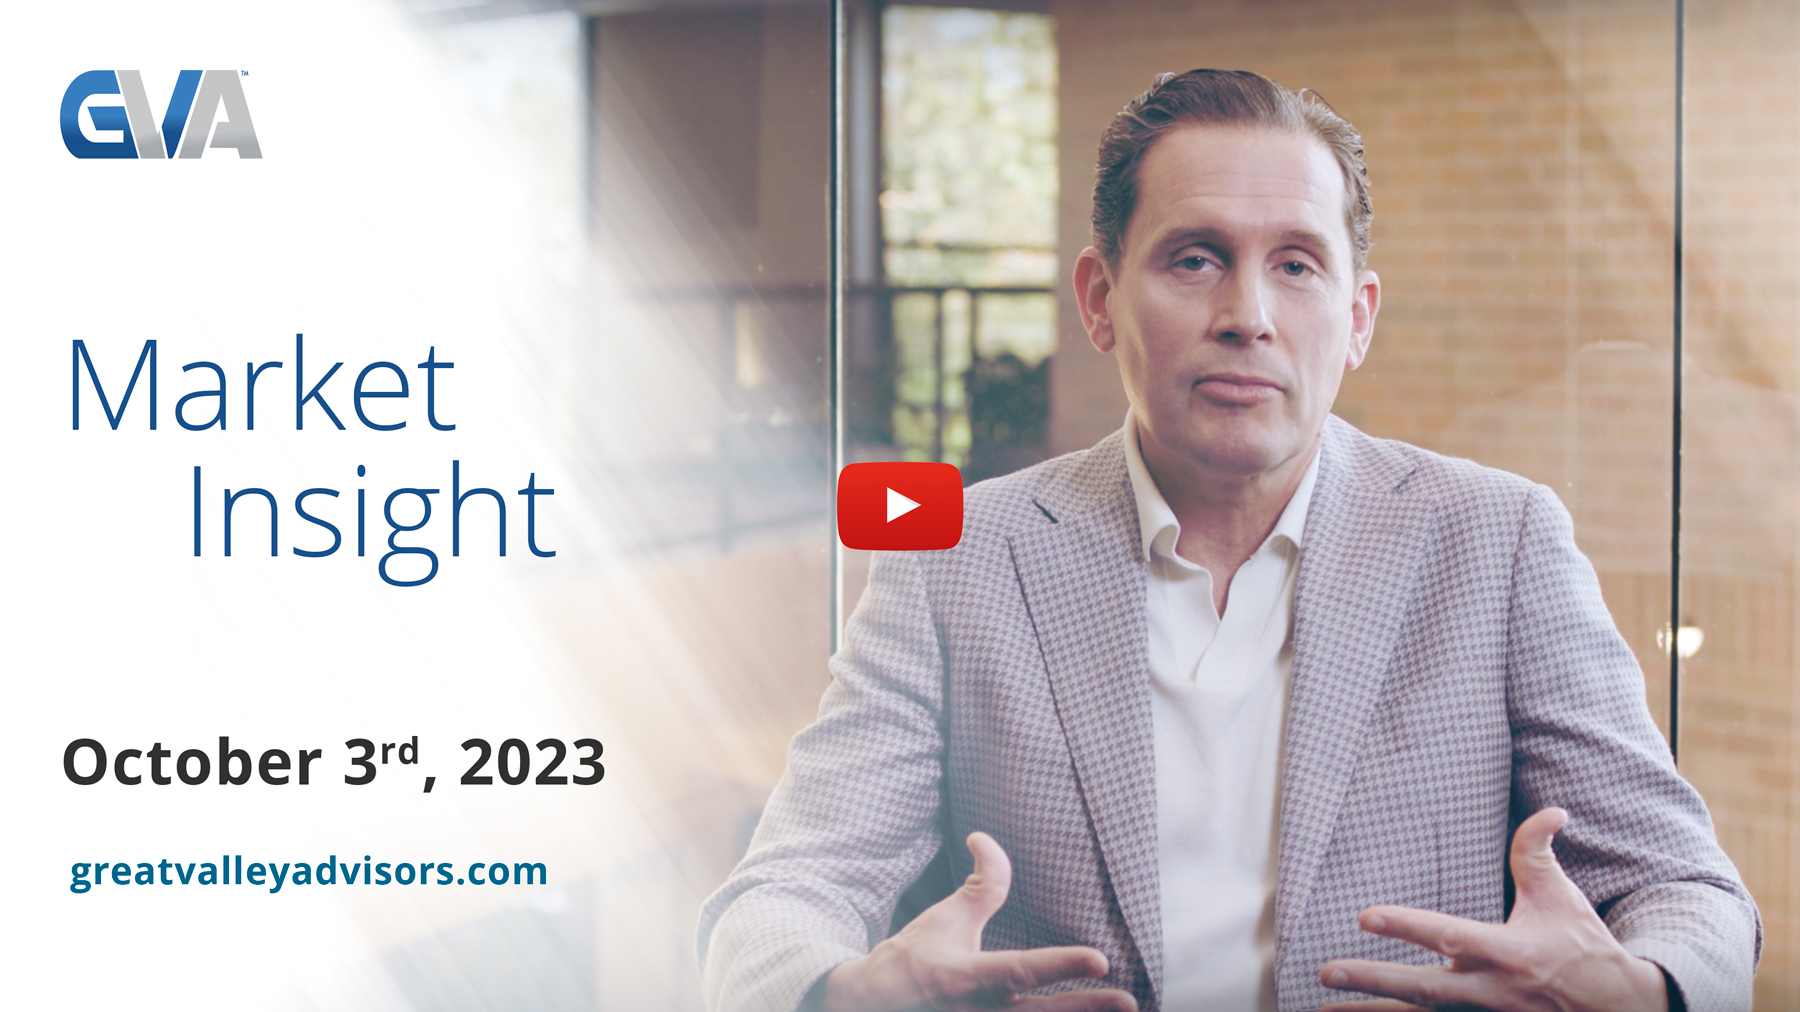 Market Insights with Eric: Episode 10, October 3rd, 2023